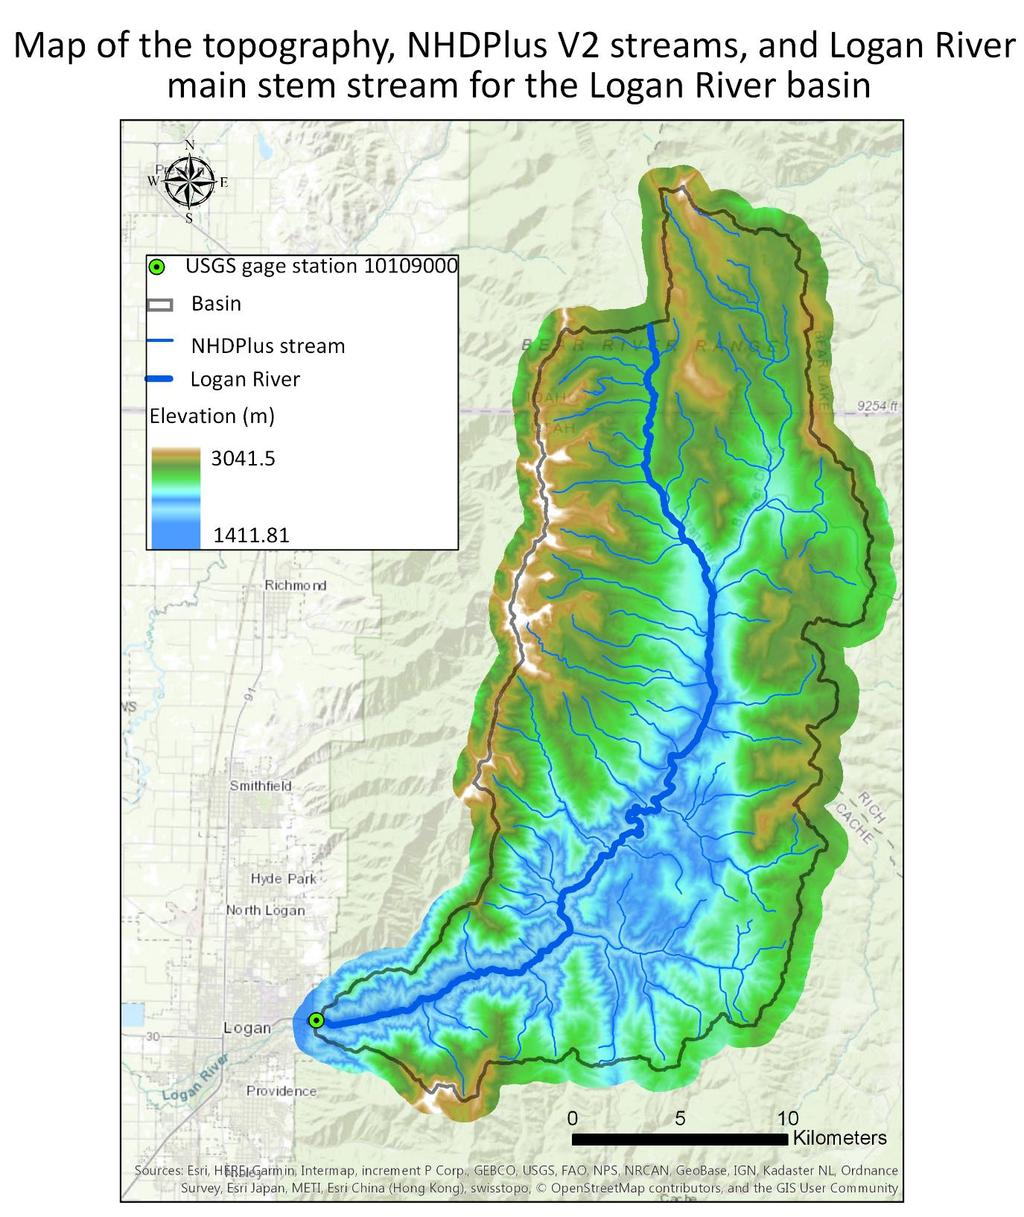 13. Report the mainstream length, total stream length, basin area and drainage density for the Logan River Basin as determined from NHDPlus flowlines.